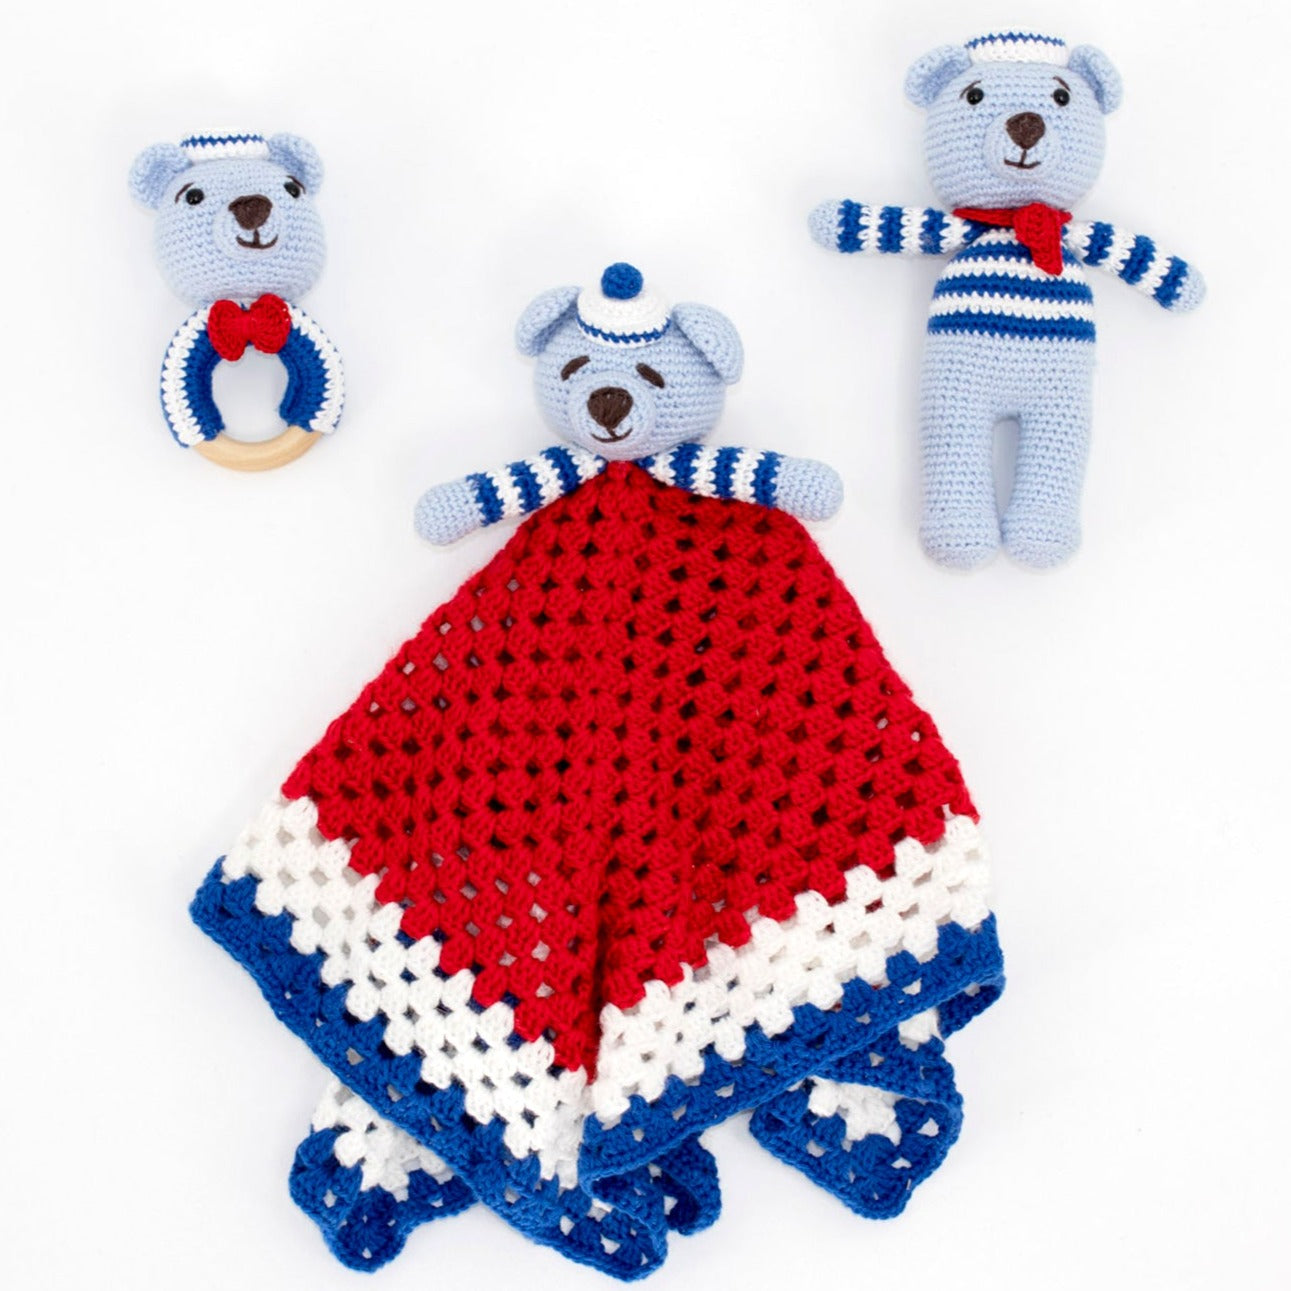 Adorable sailor teddy bear crochet baby security blanket with matching teddy bear and rattle. All handmade with hypoallergenic organic cotton. 